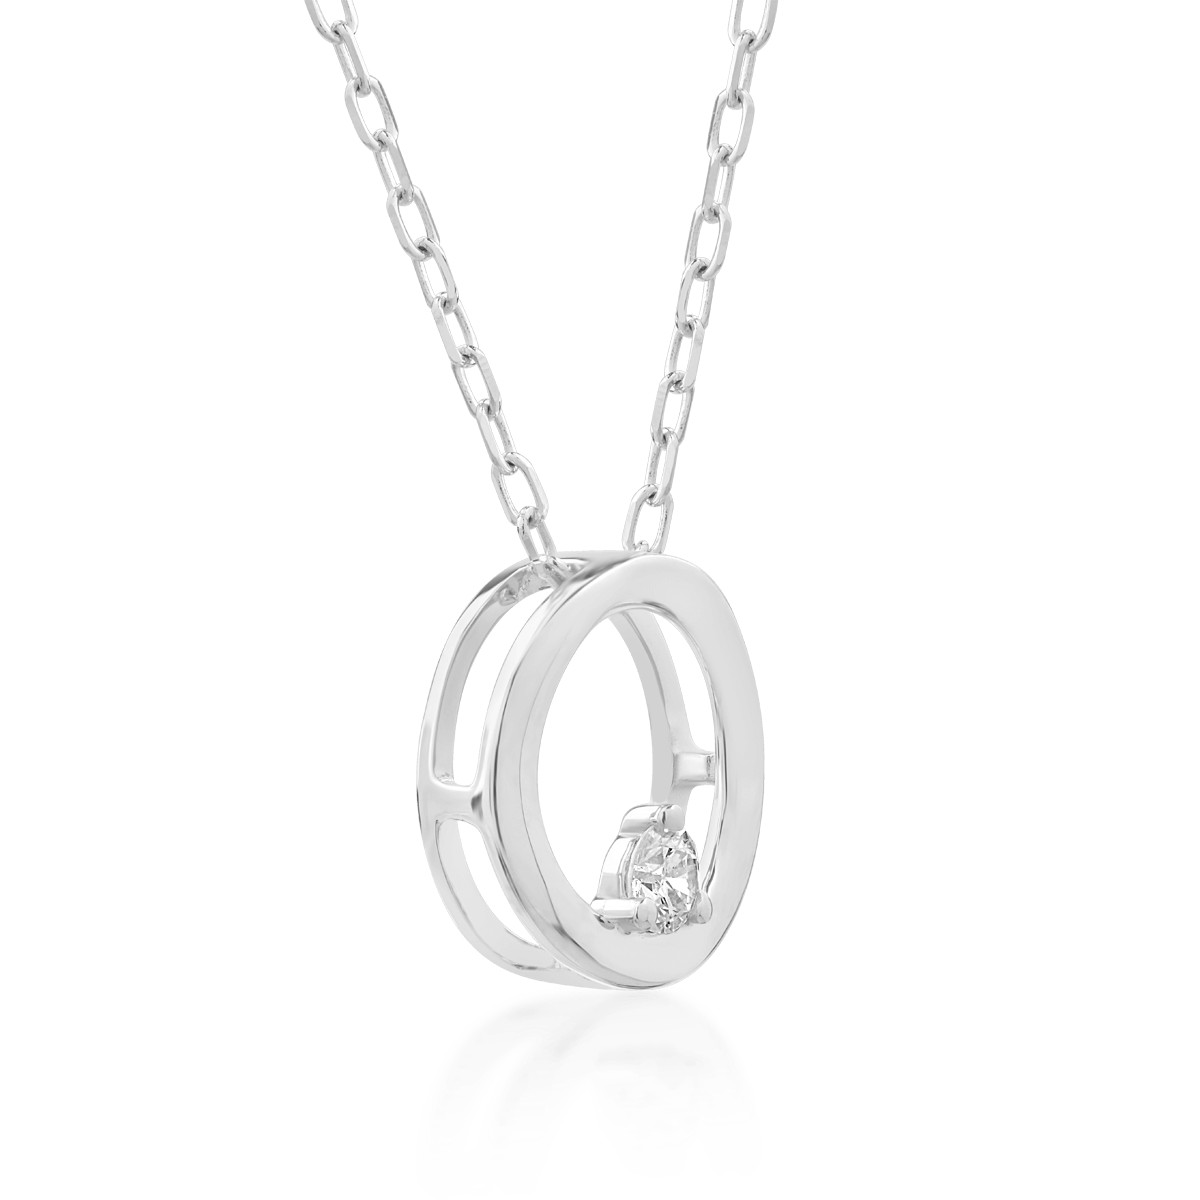 18K white gold pendant necklace with 0.035ct diamond